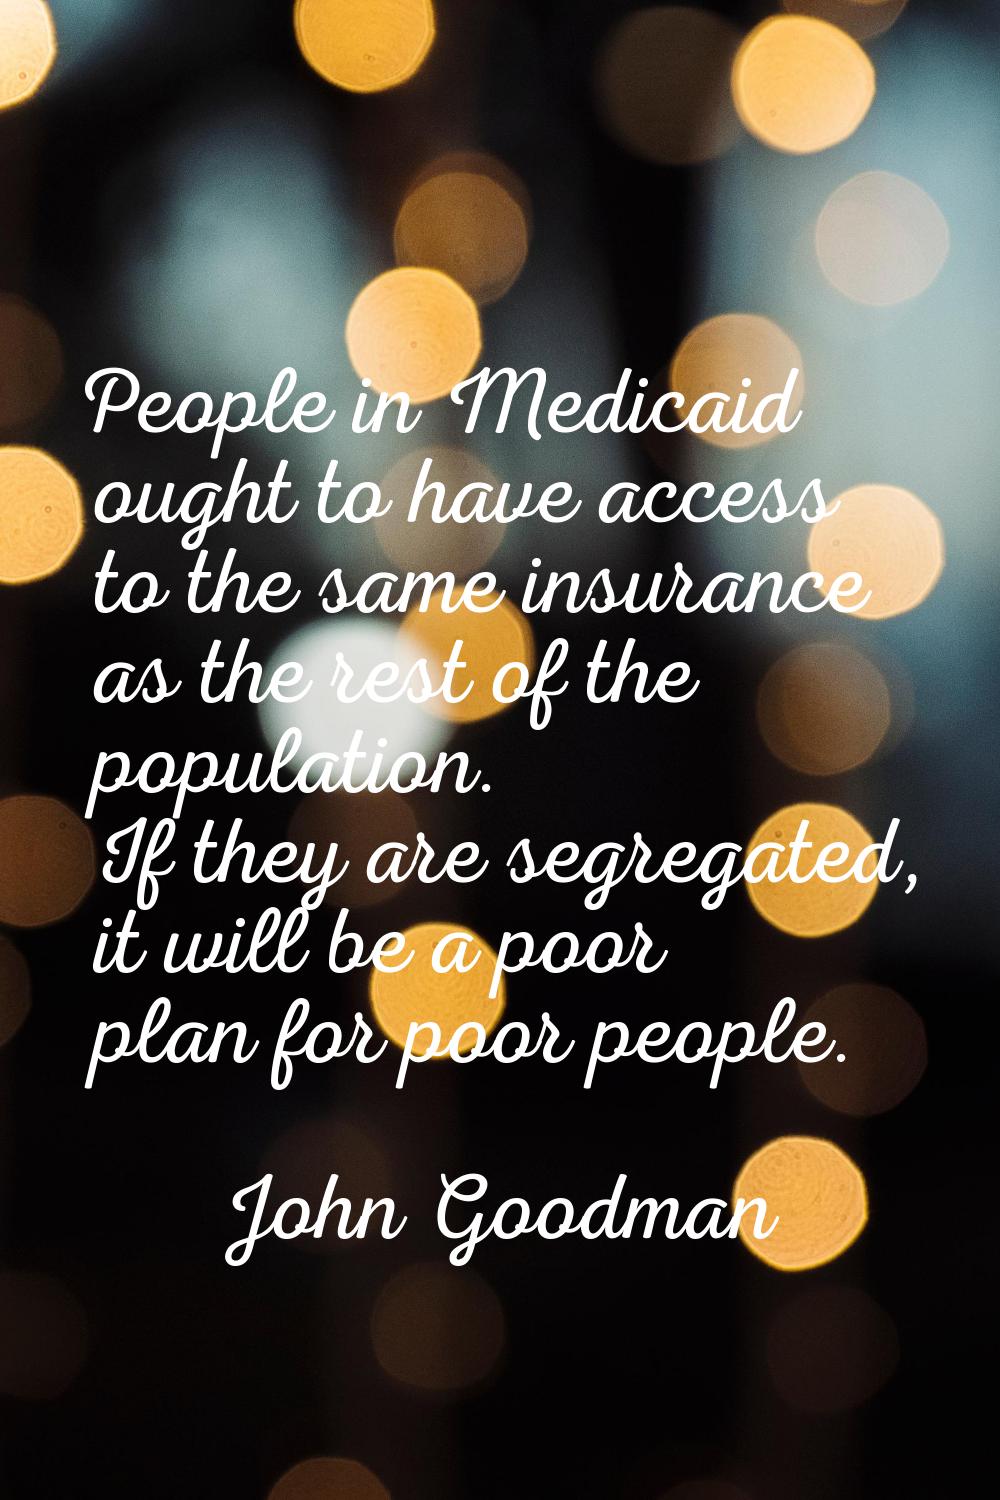 People in Medicaid ought to have access to the same insurance as the rest of the population. If the